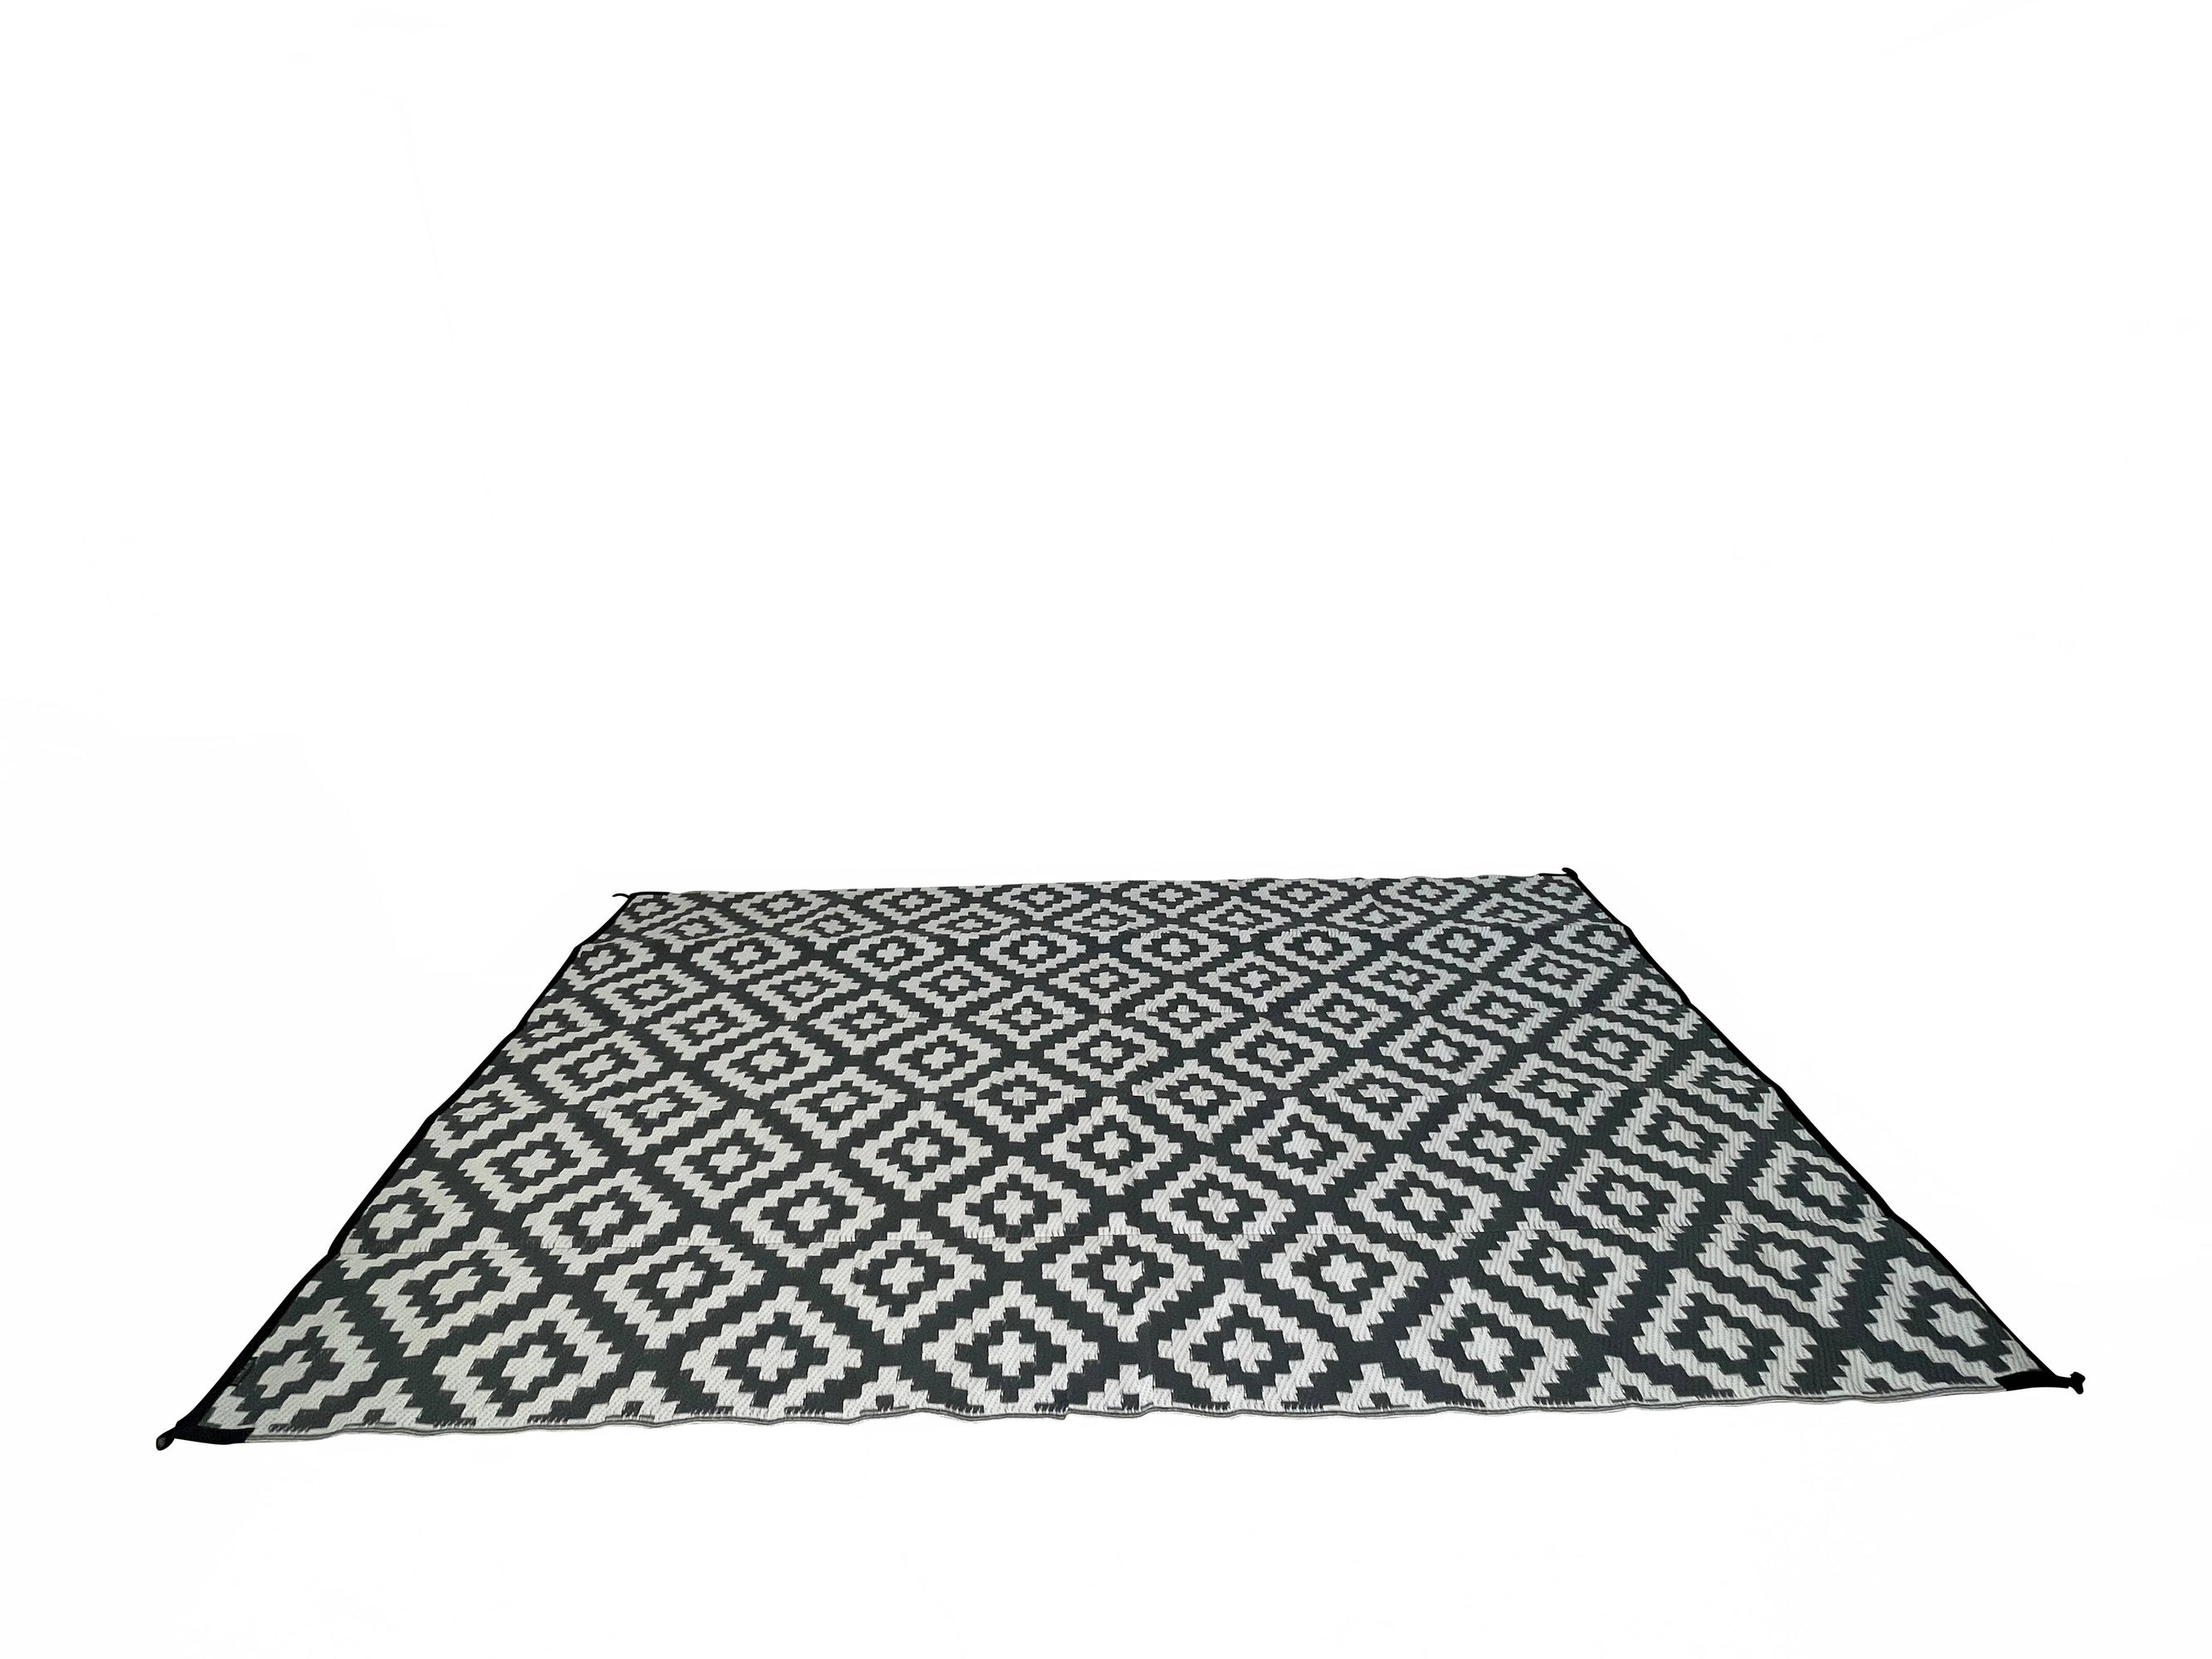 Camping Rug made out of recycled plastic